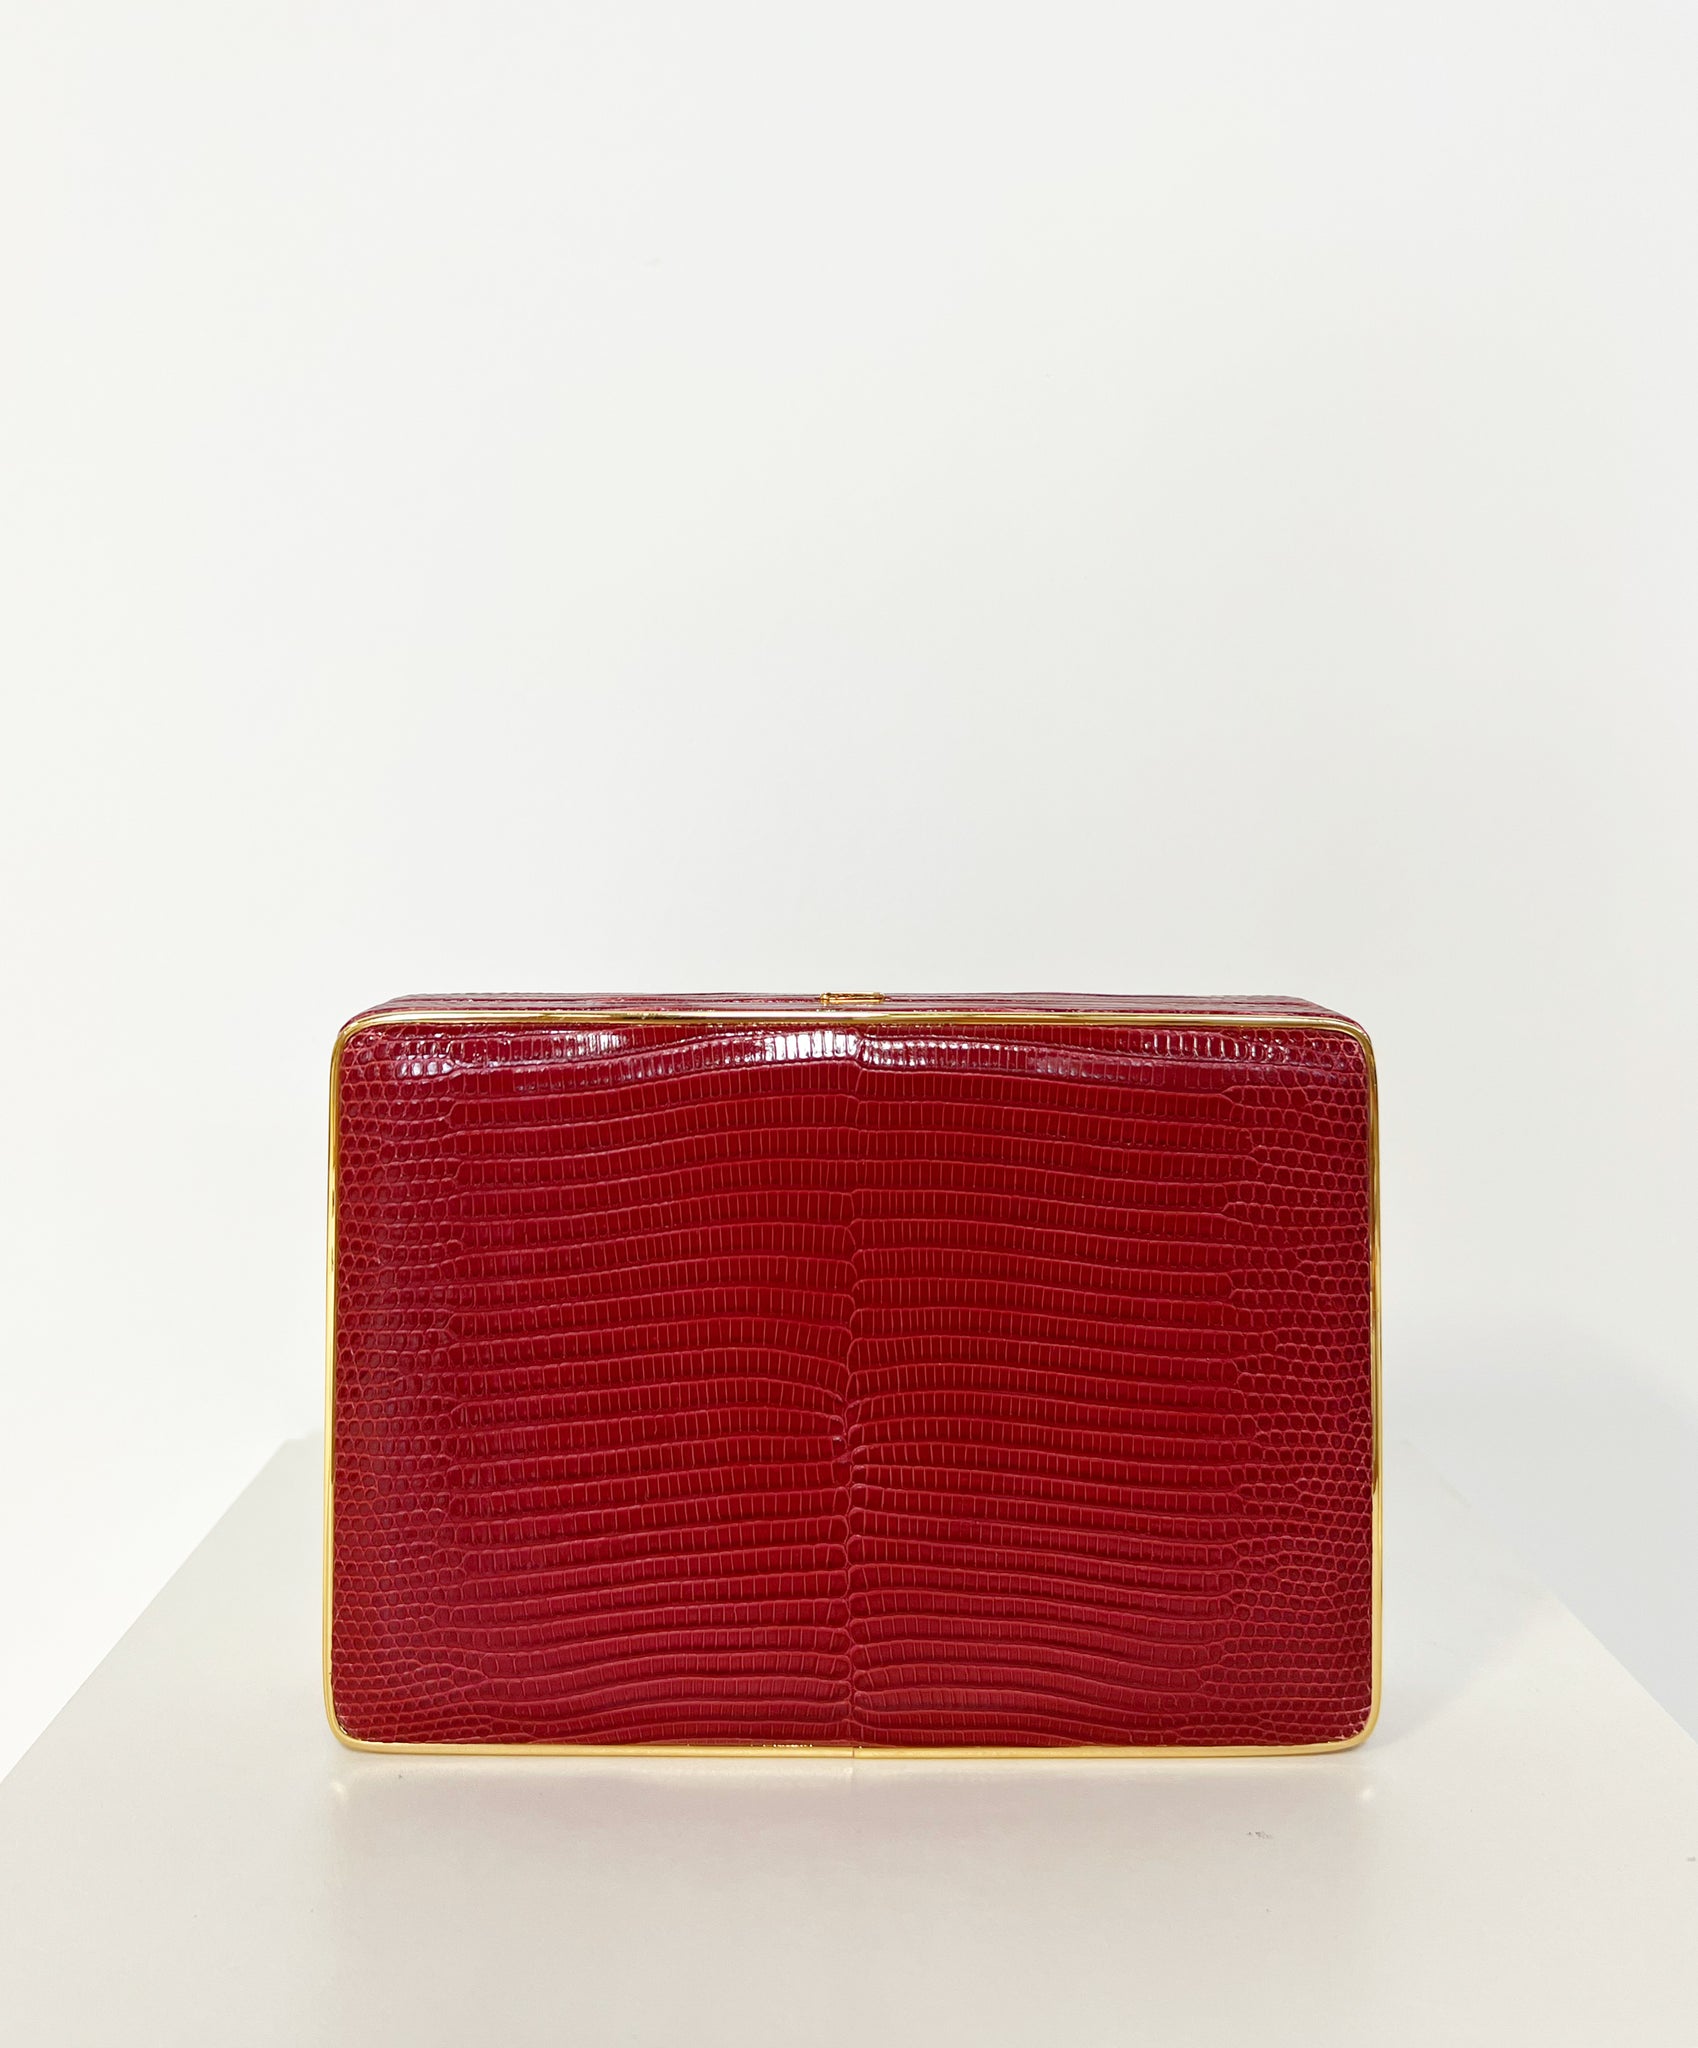 The Square Compact Case in Lizard - Chili Red